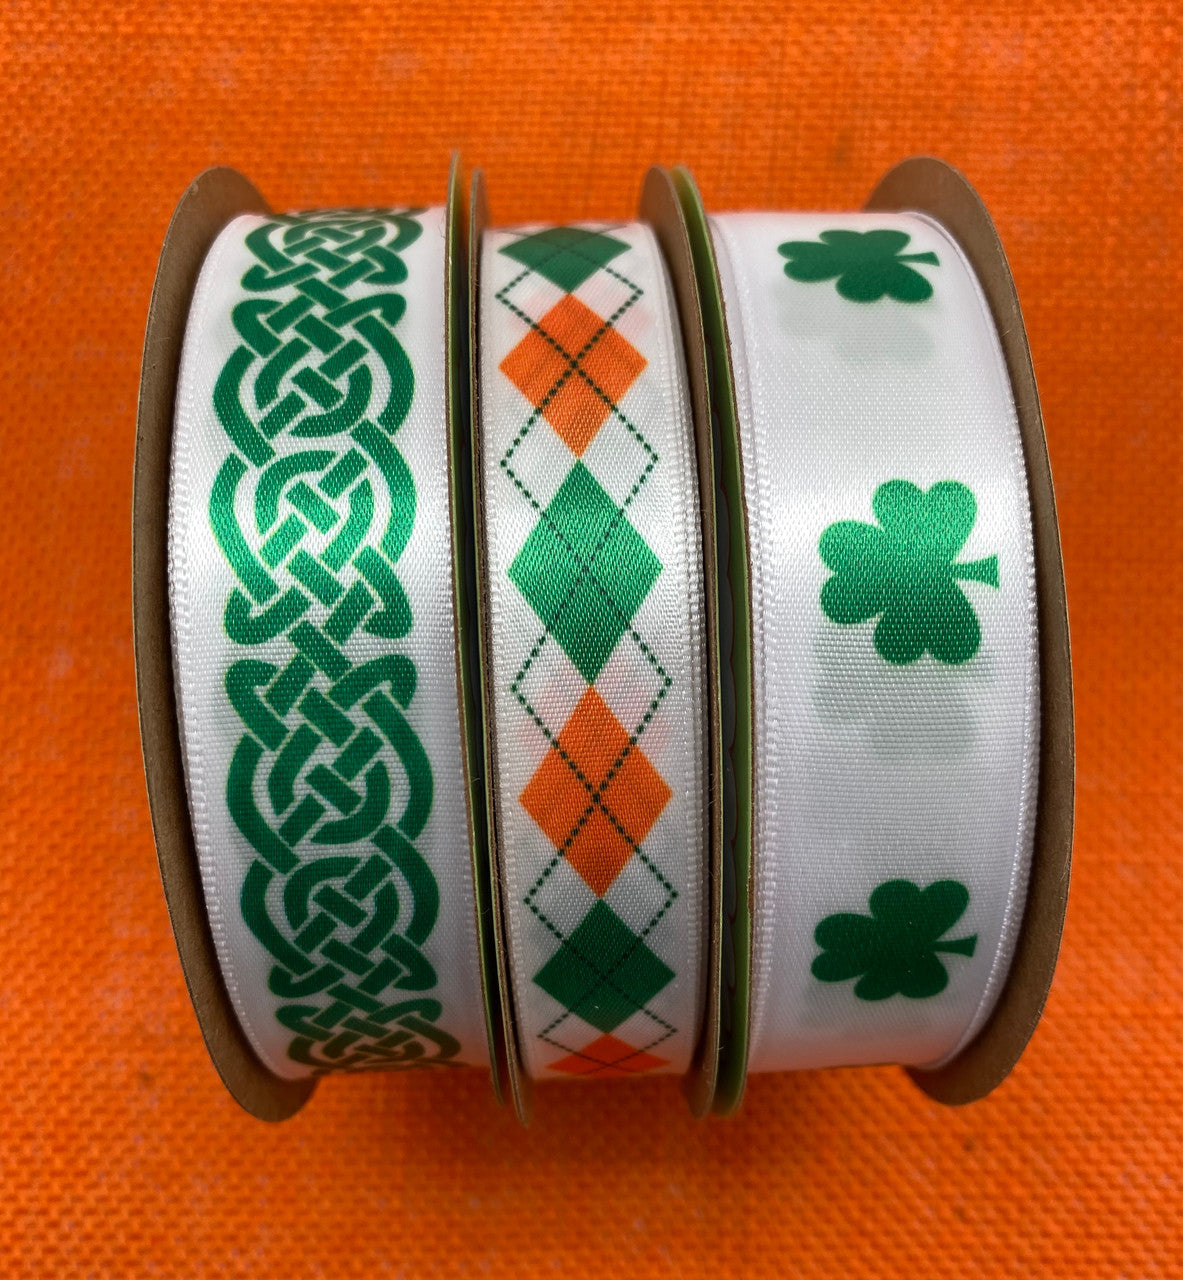 Combining our St. Patrick's themed ribbons will make for a colorful and fun St. Patrick's celebration!